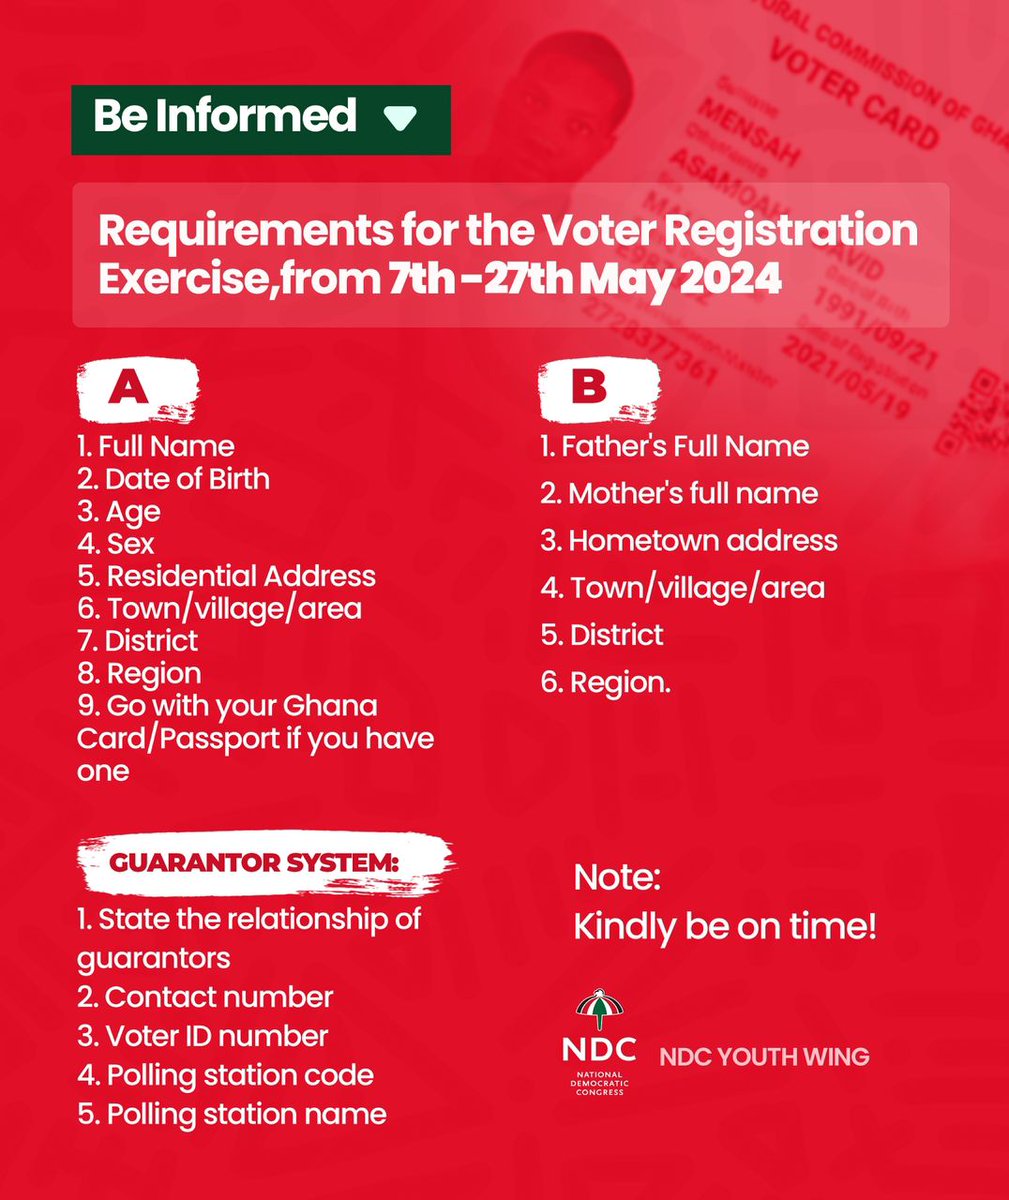 Stay informed! Let's register to vote for change! Kindly share the requirements for the Voter Registration exercise with your friends and family.  #TheGhanaWeWant #RegisterToVote #ChangeIsComing #YouthPower